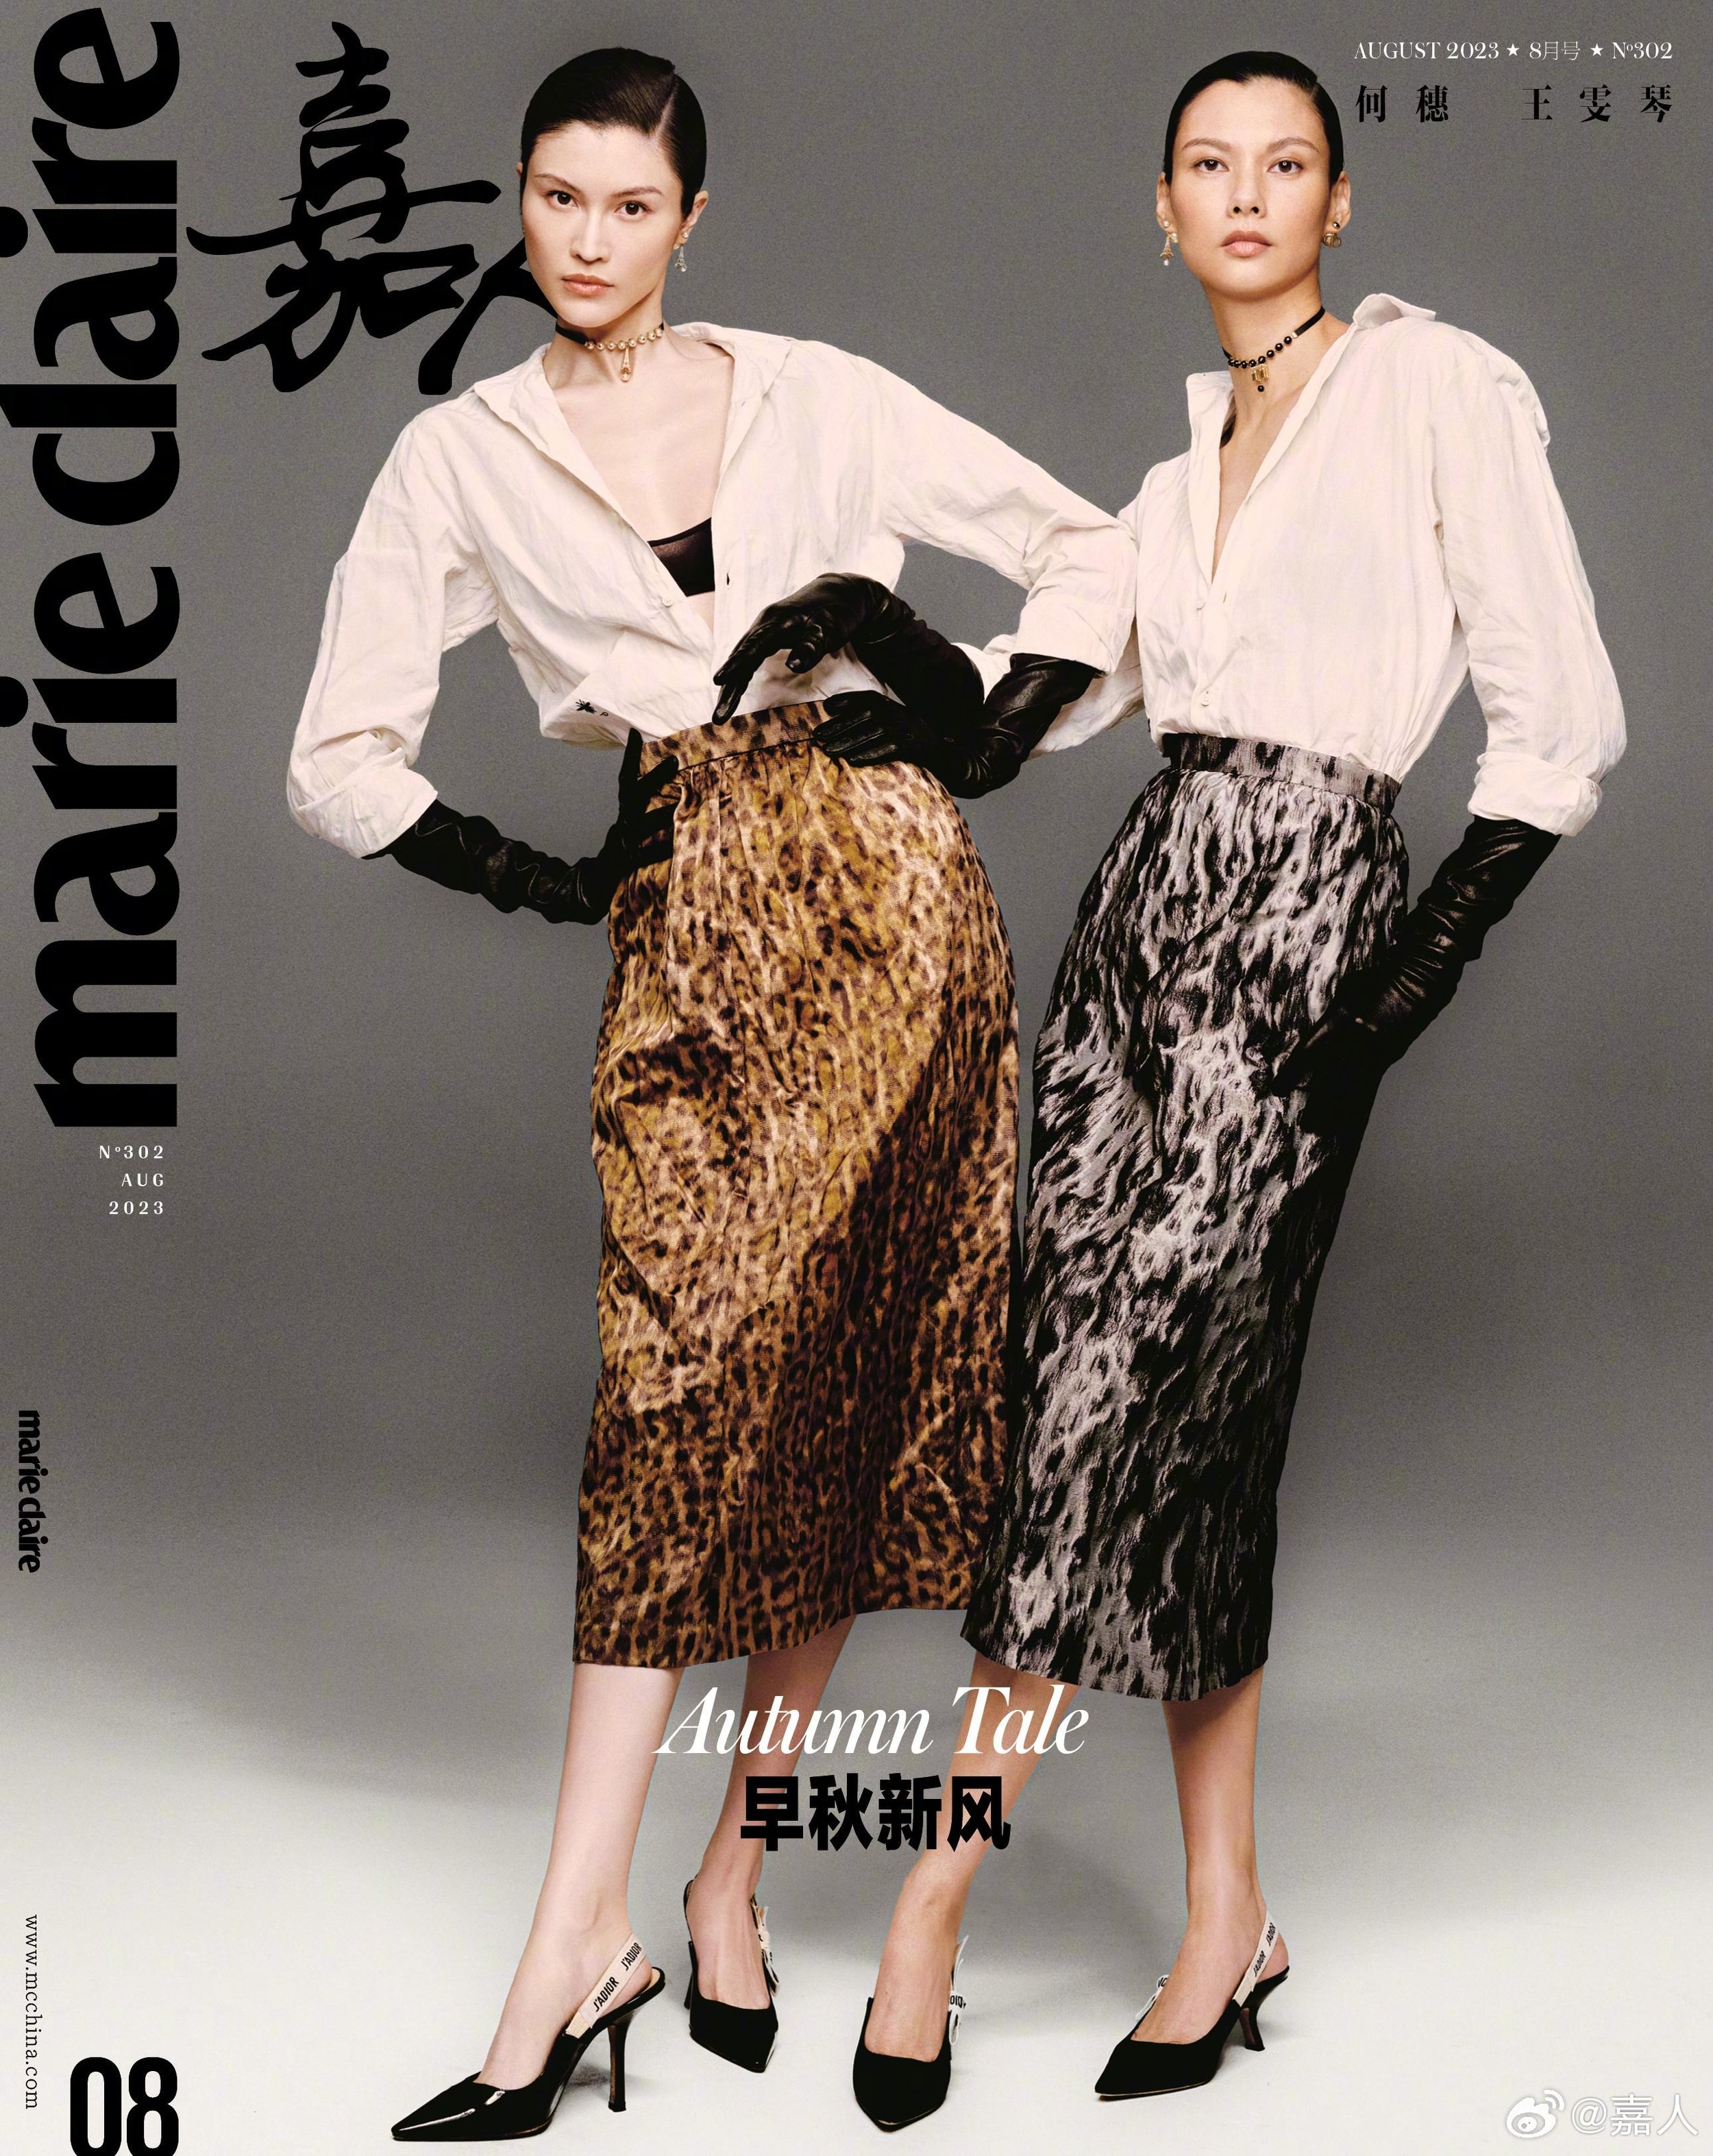 Sui He and Wang Wenqin by Nick Yang for Marie Claire China — Anne